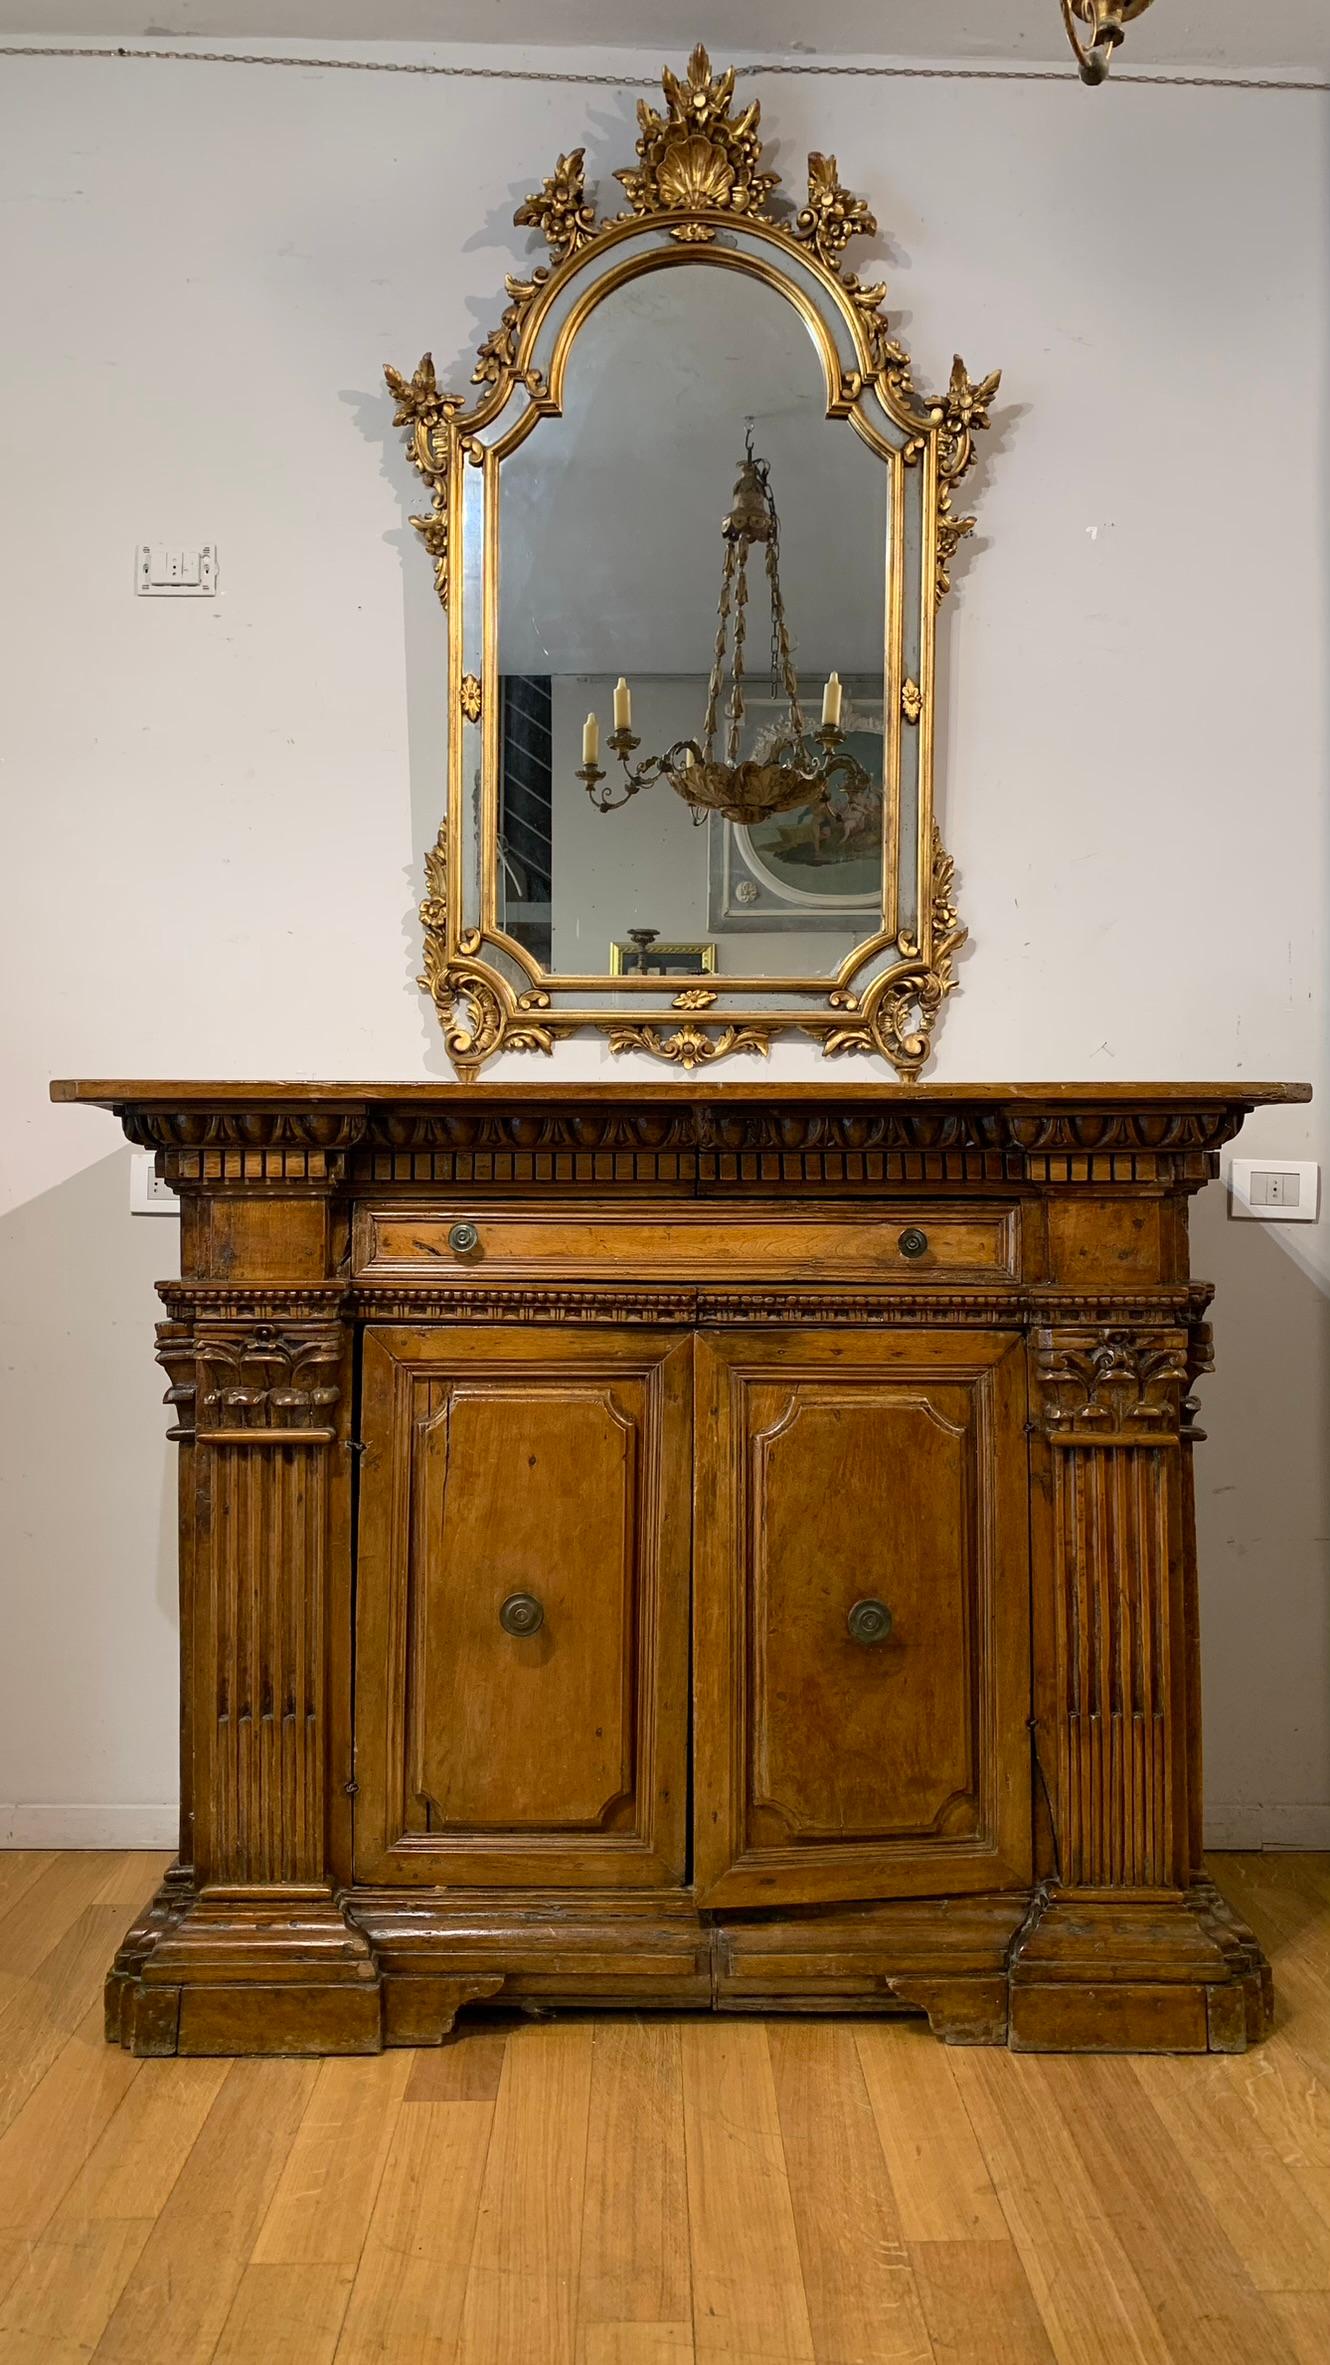 Beautiful sideboard in blond walnut from the Renaissance period, with classic architectural elements in solid walnut. The corners are decorated with pilasters and Corinthian capitals. The undertop is decorated with classic ovules. The sideboard also